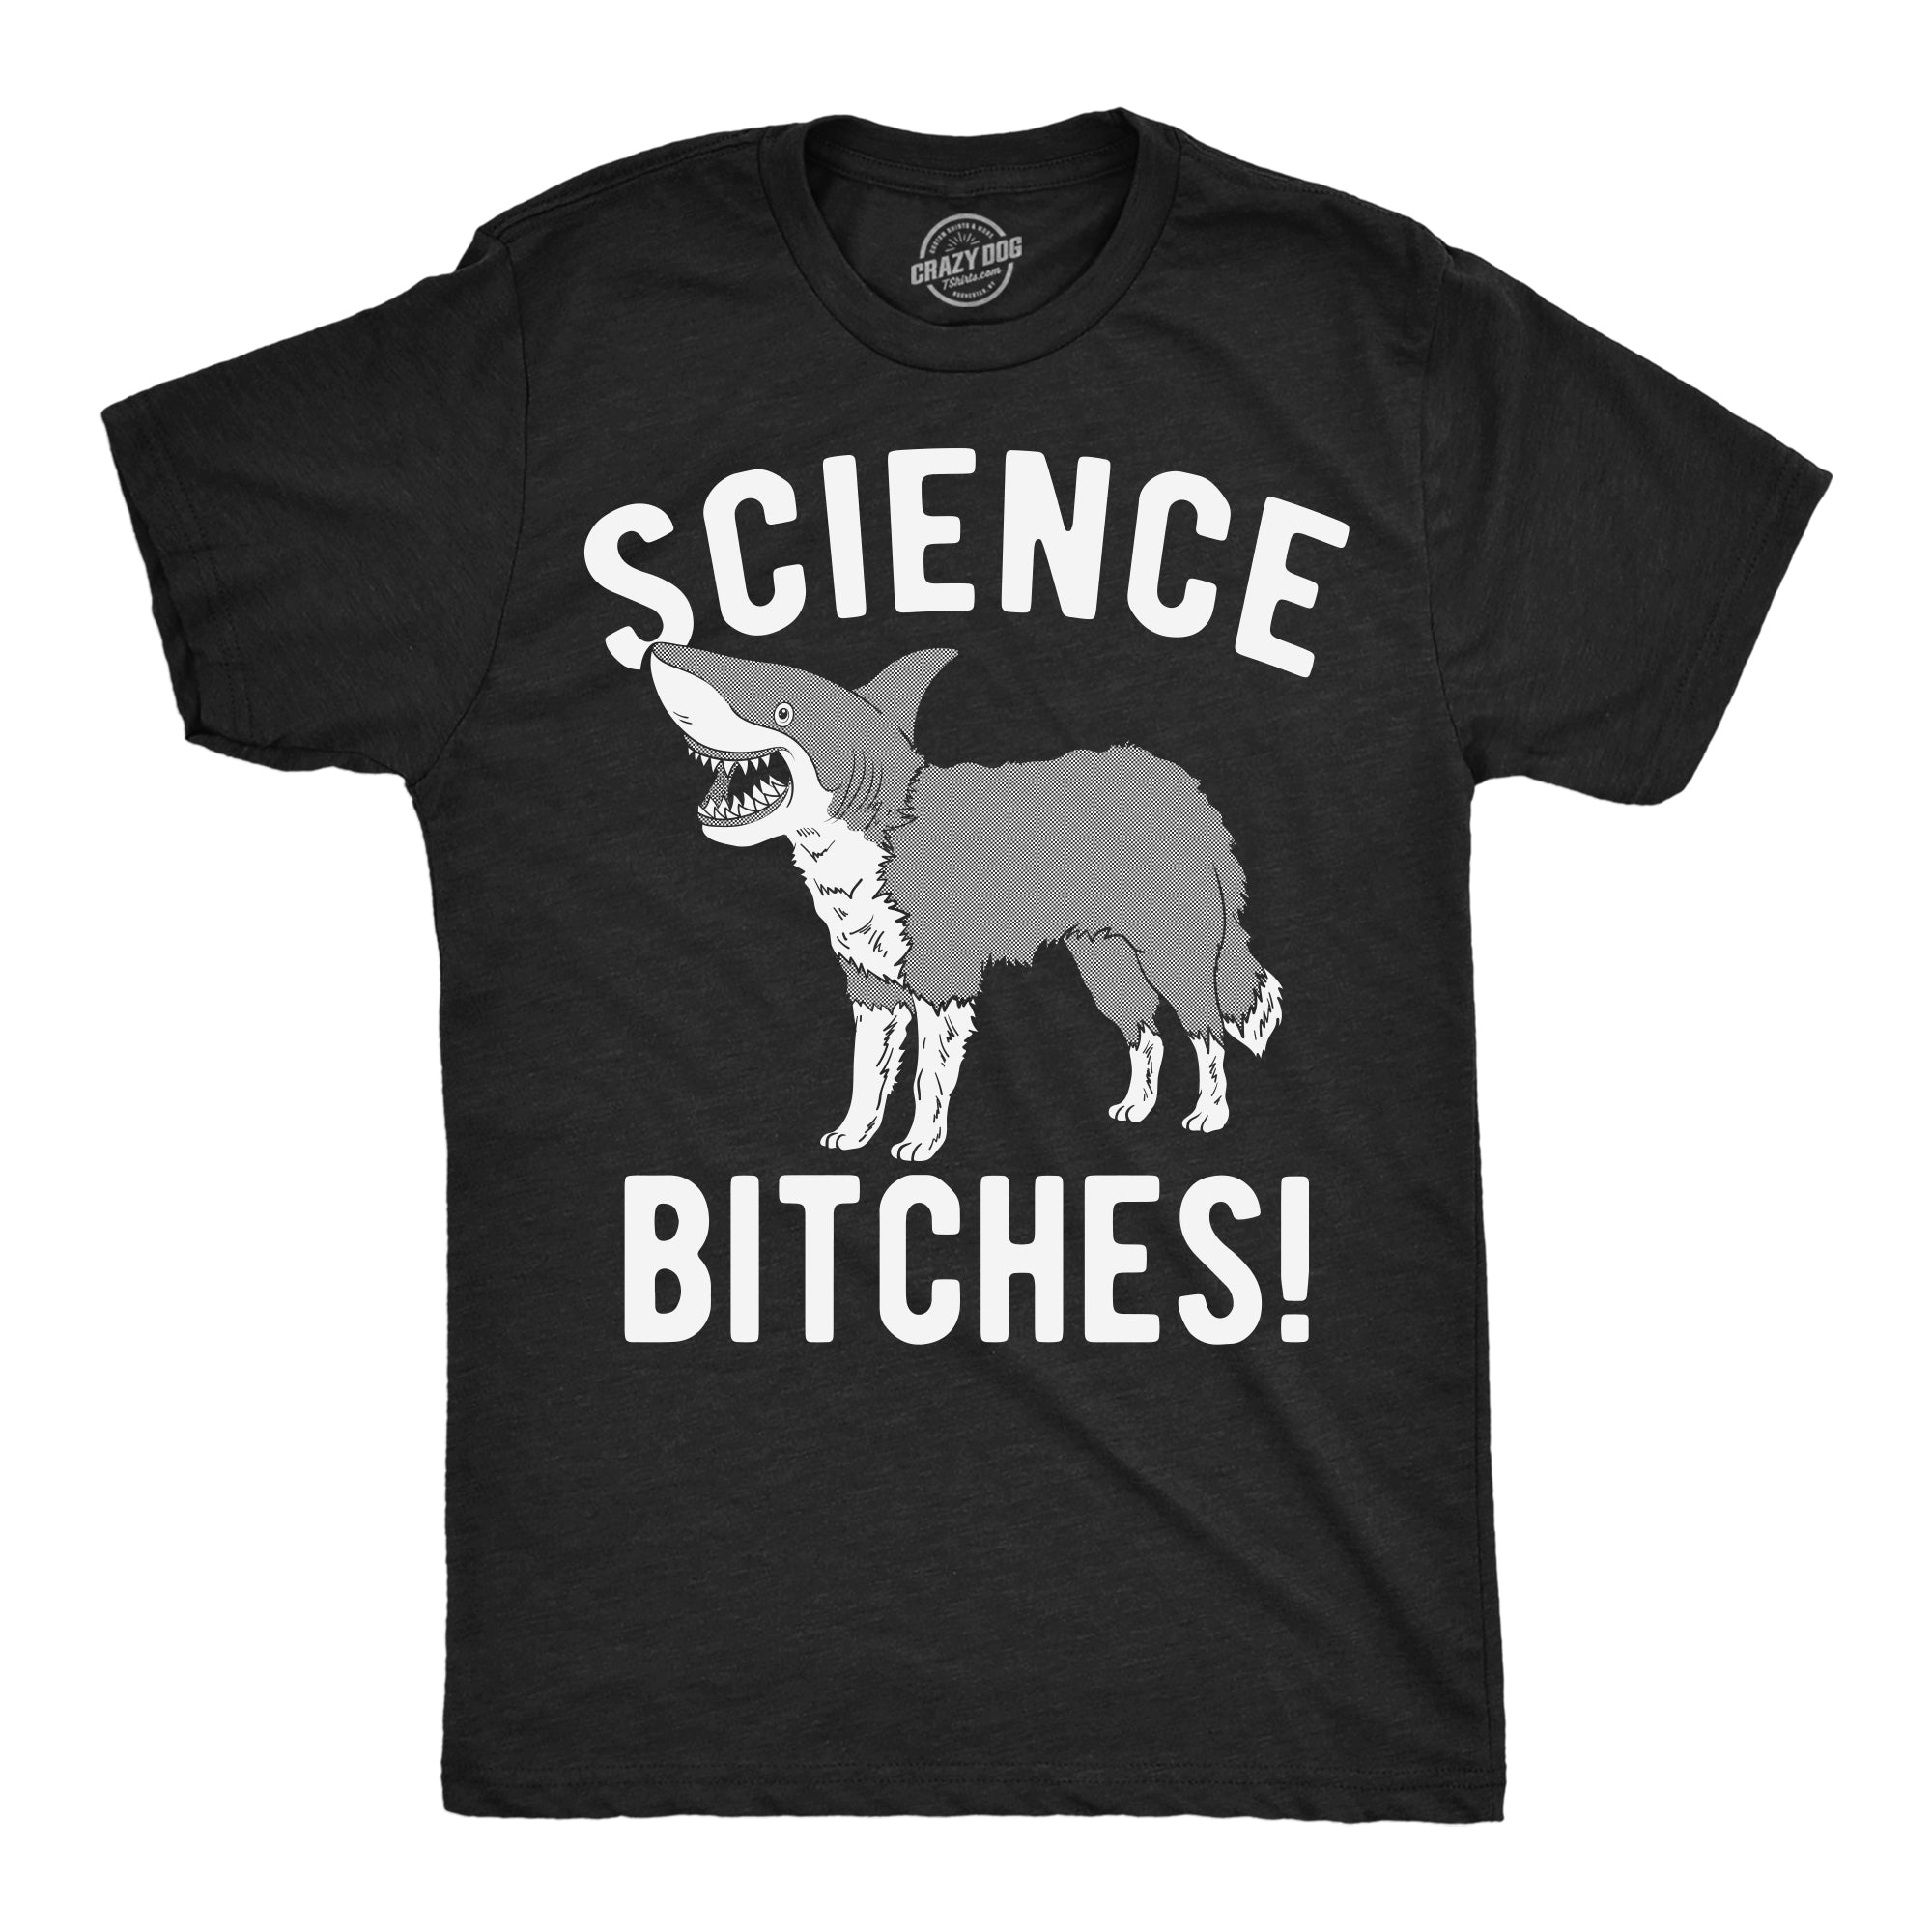 Funny Heather Black - Science Bitches Science Bitches Mens T Shirt Nerdy sarcastic Science Tee